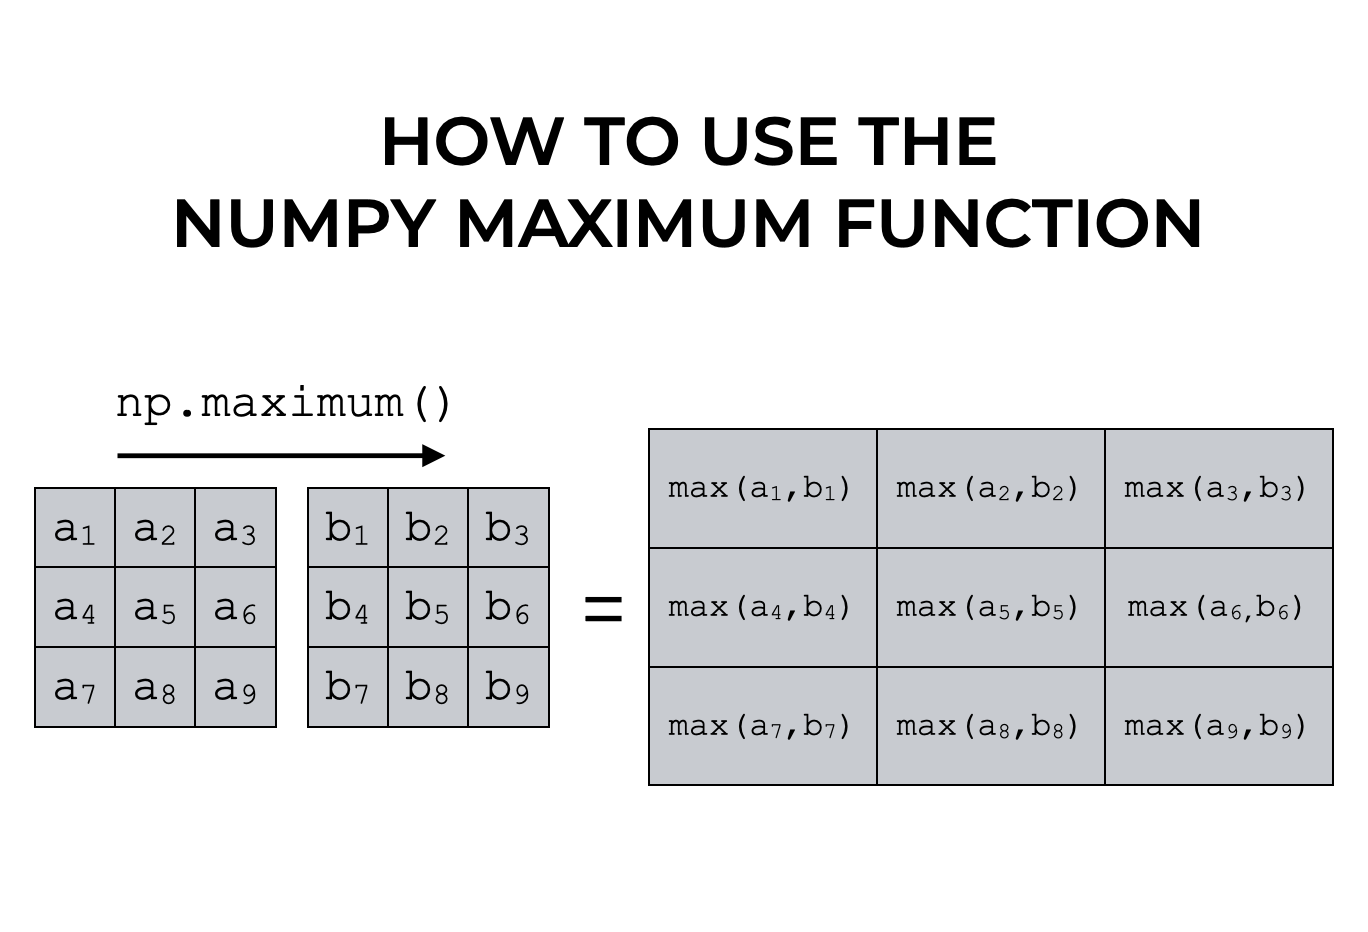 Max function